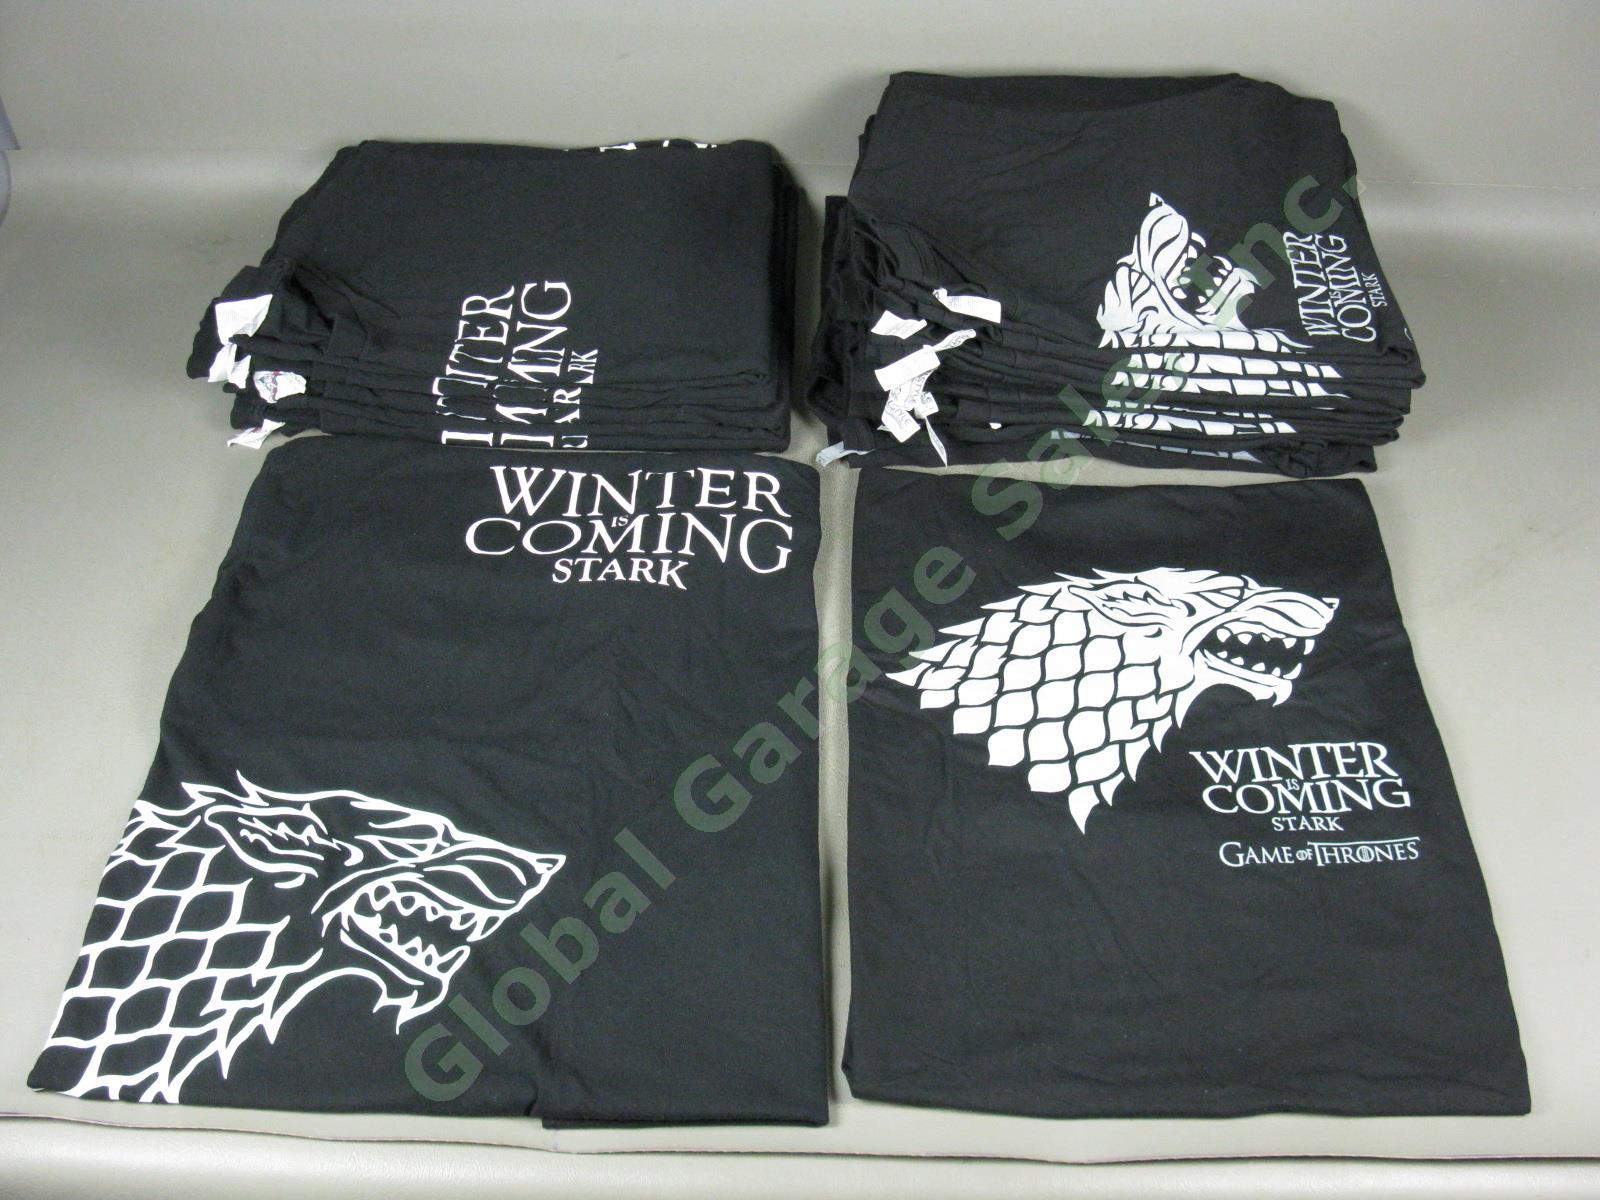 20 RARE Game Of Thrones Winter Is Coming Shirt Lot 2010 San Diego Comic-Con SDCC